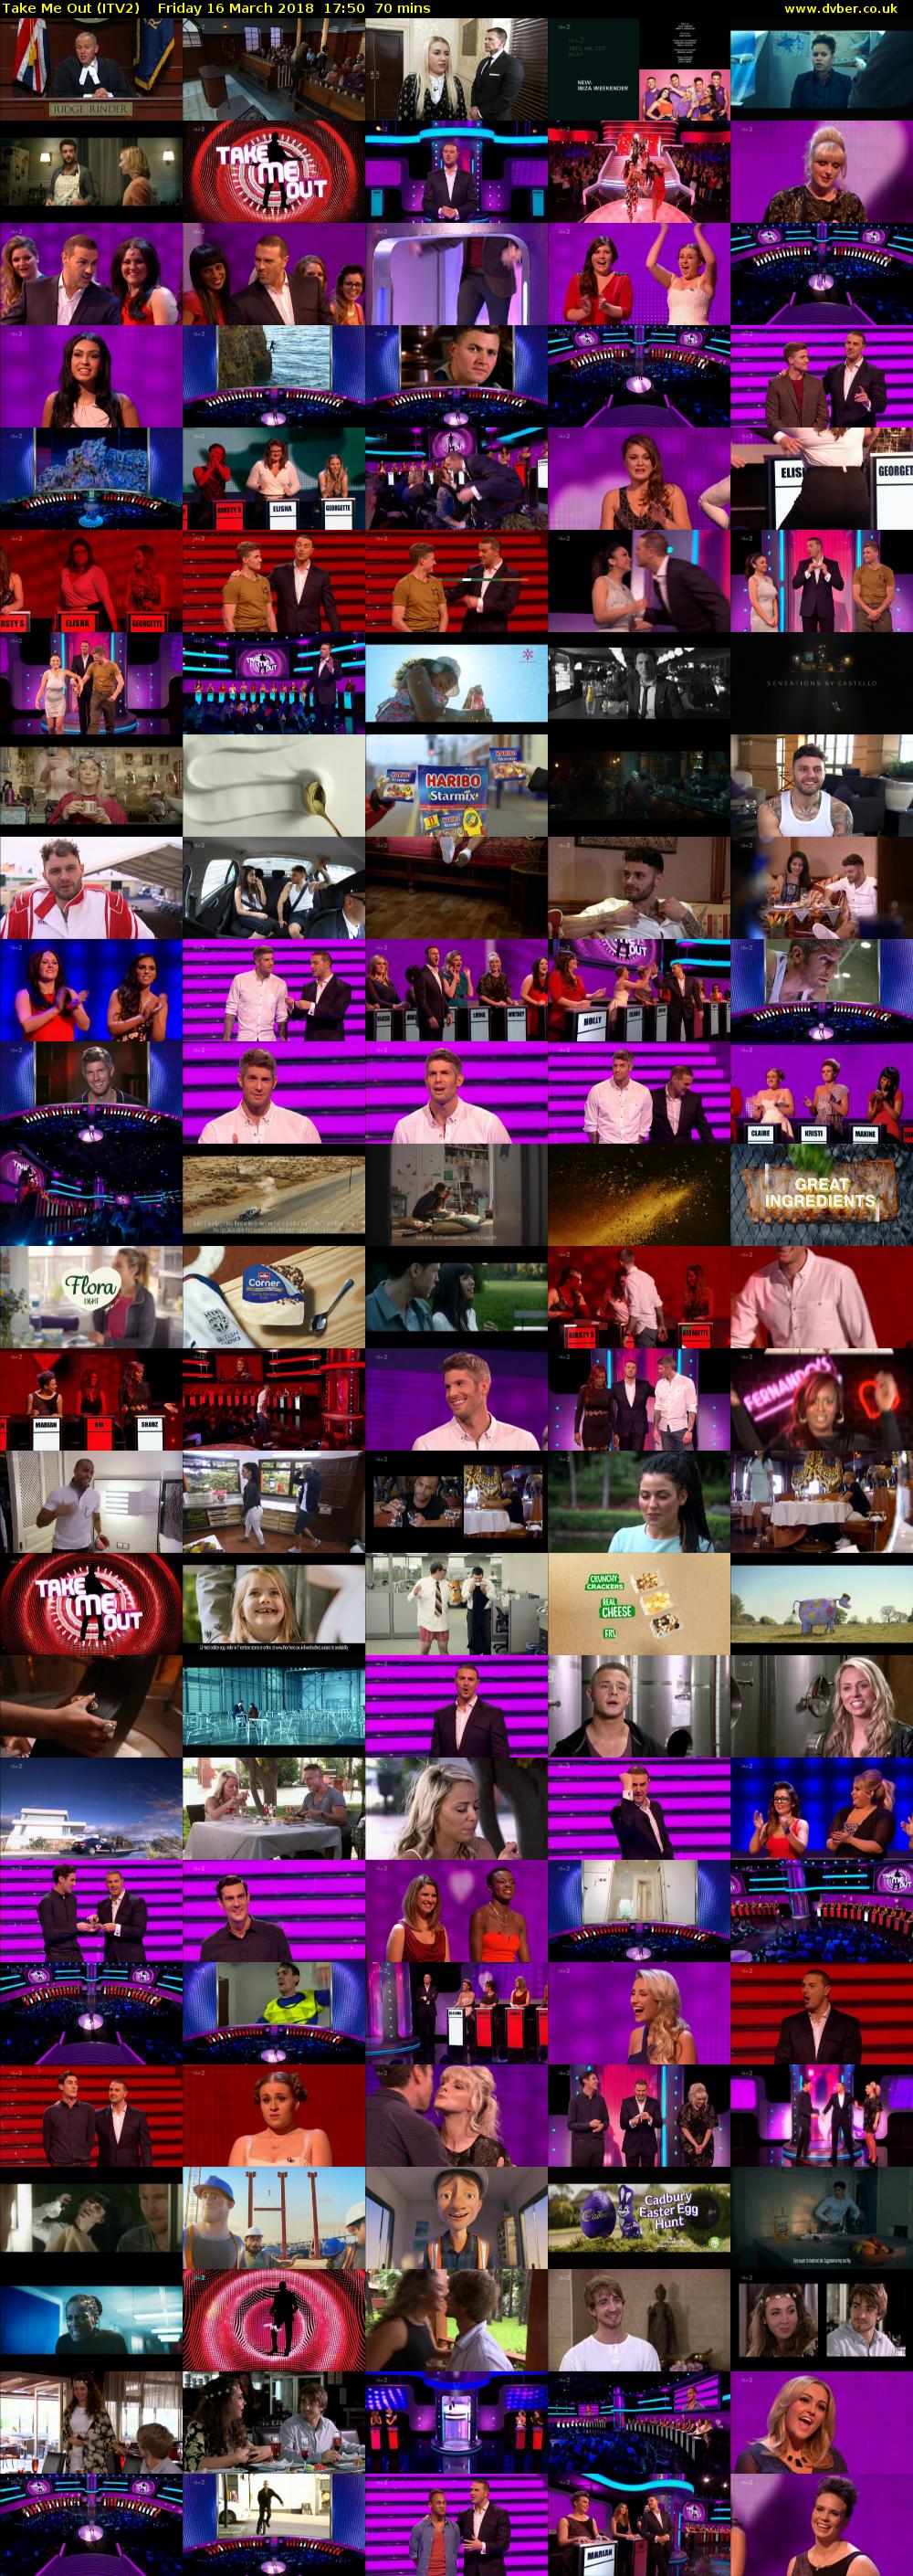 Take Me Out (ITV2) Friday 16 March 2018 17:50 - 19:00